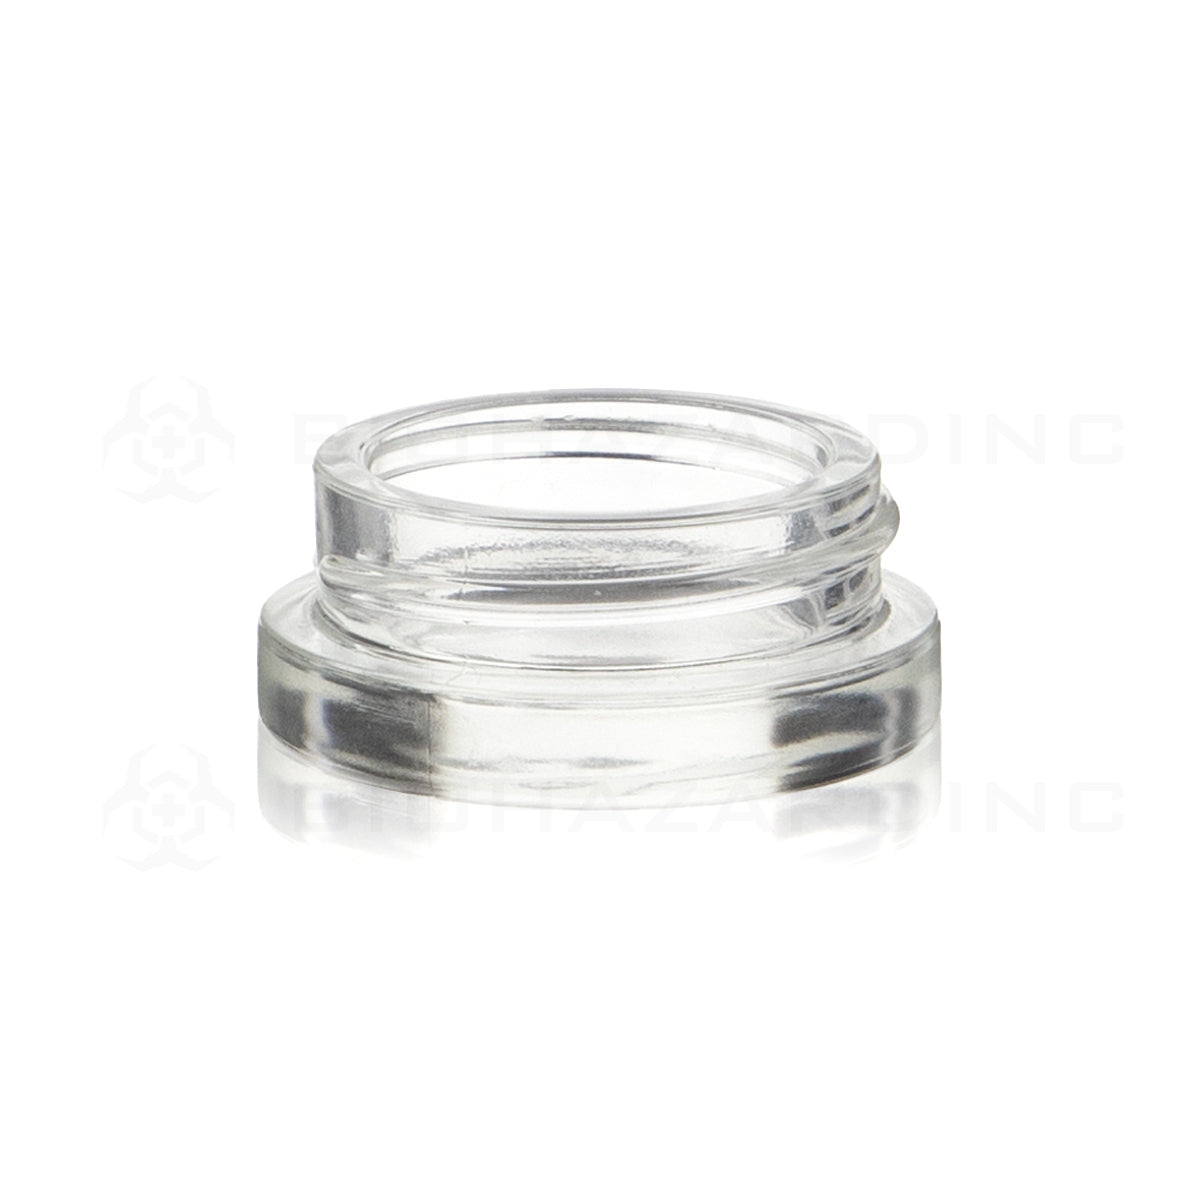 Concentrate Containers | Glass Concentrate Jars - Clear | 38mm - 7mL - 96 Count Concentrate Container Biohazard Inc   